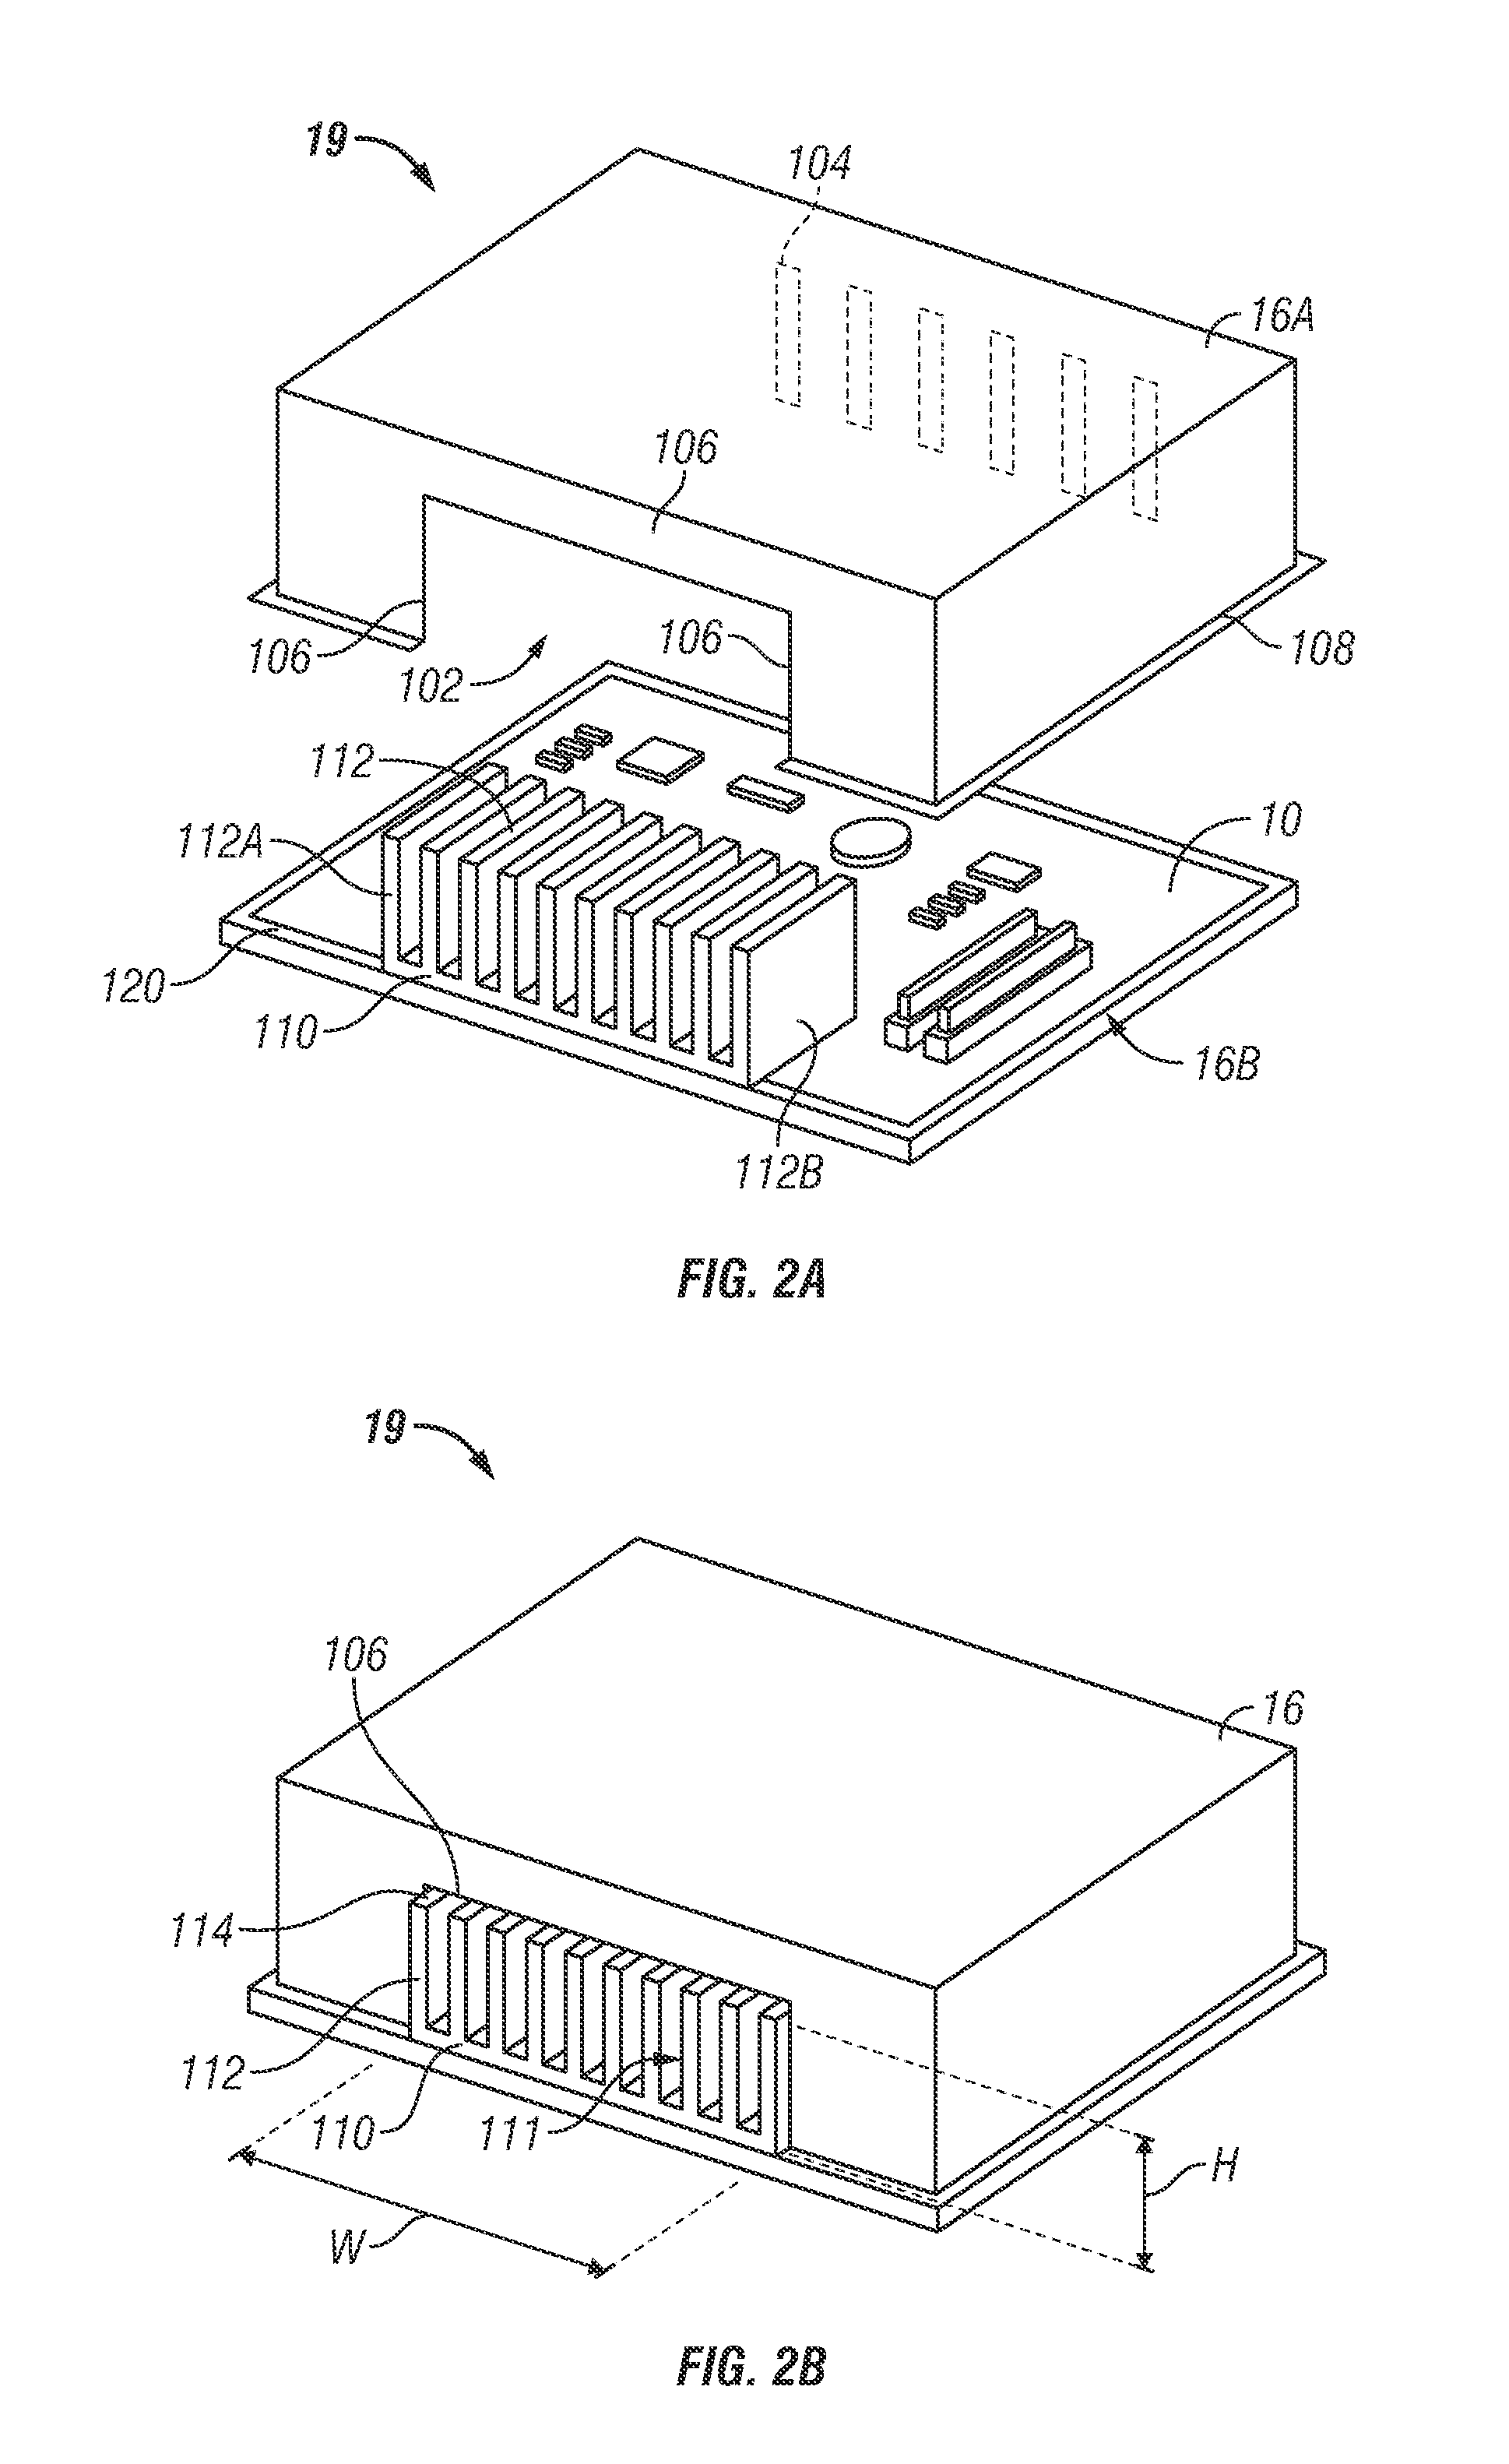 Passive cooling and EMI shielding system